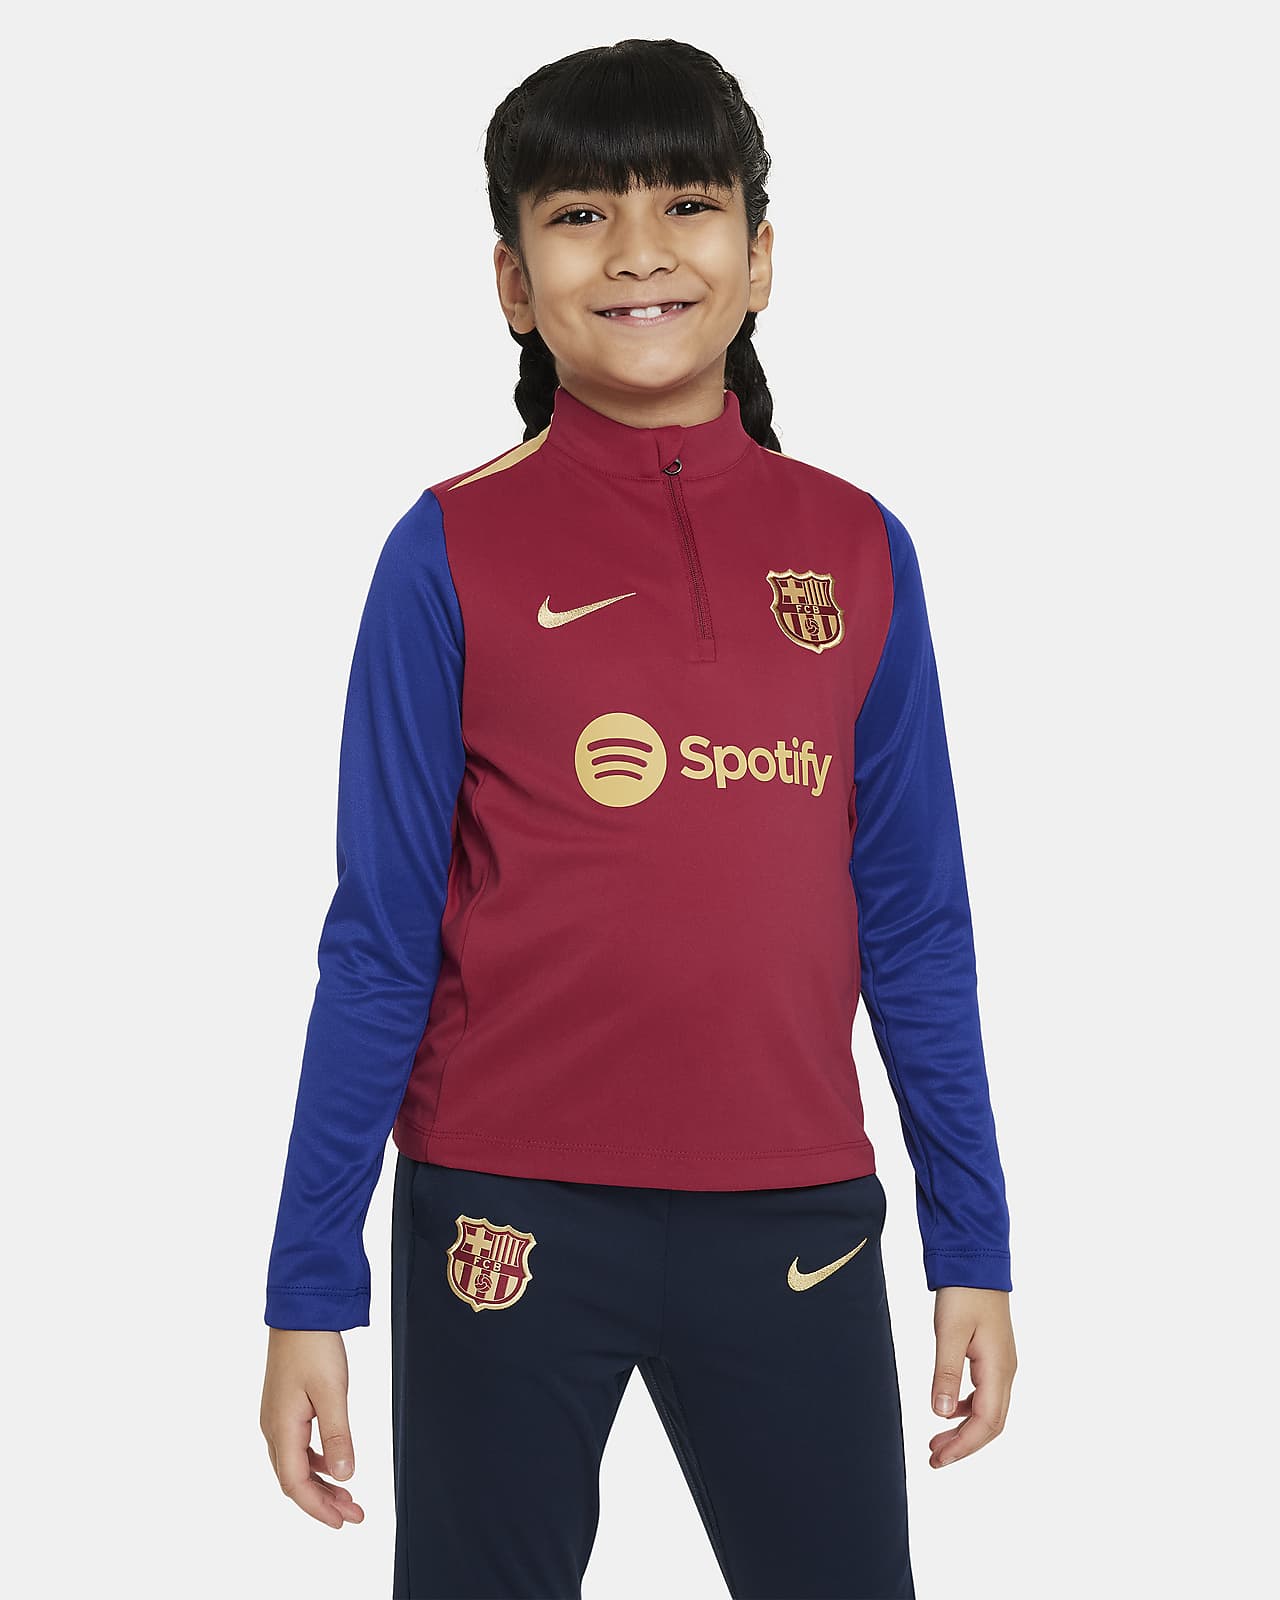 F.C. Barcelona Academy Pro Younger Kids' Nike Dri-FIT Football Drill Top